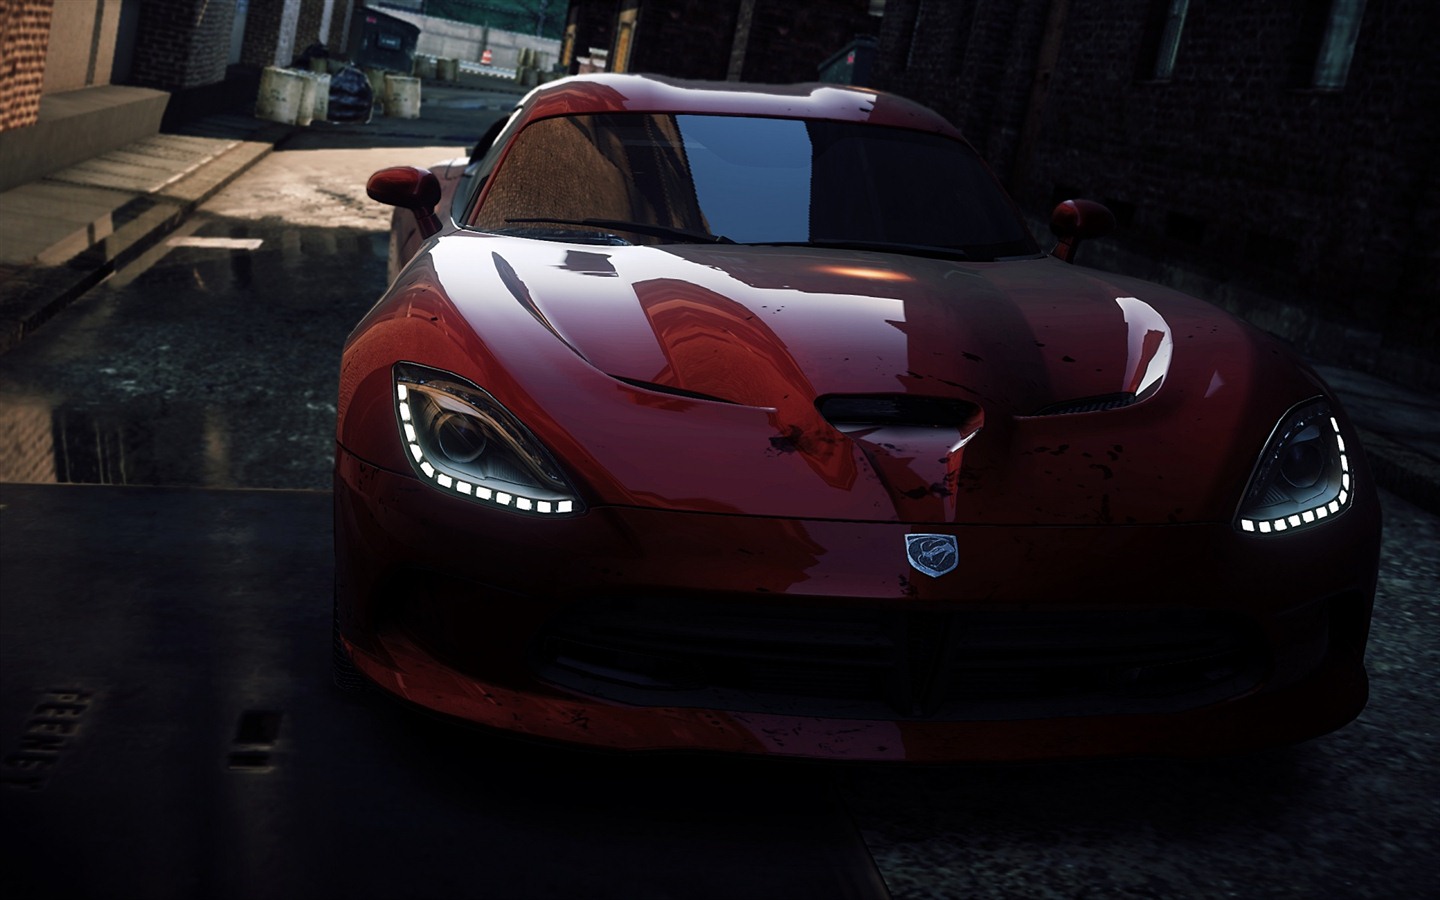 Need for Speed: Most Wanted 极品飞车17：最高通缉 高清壁纸2 - 1440x900